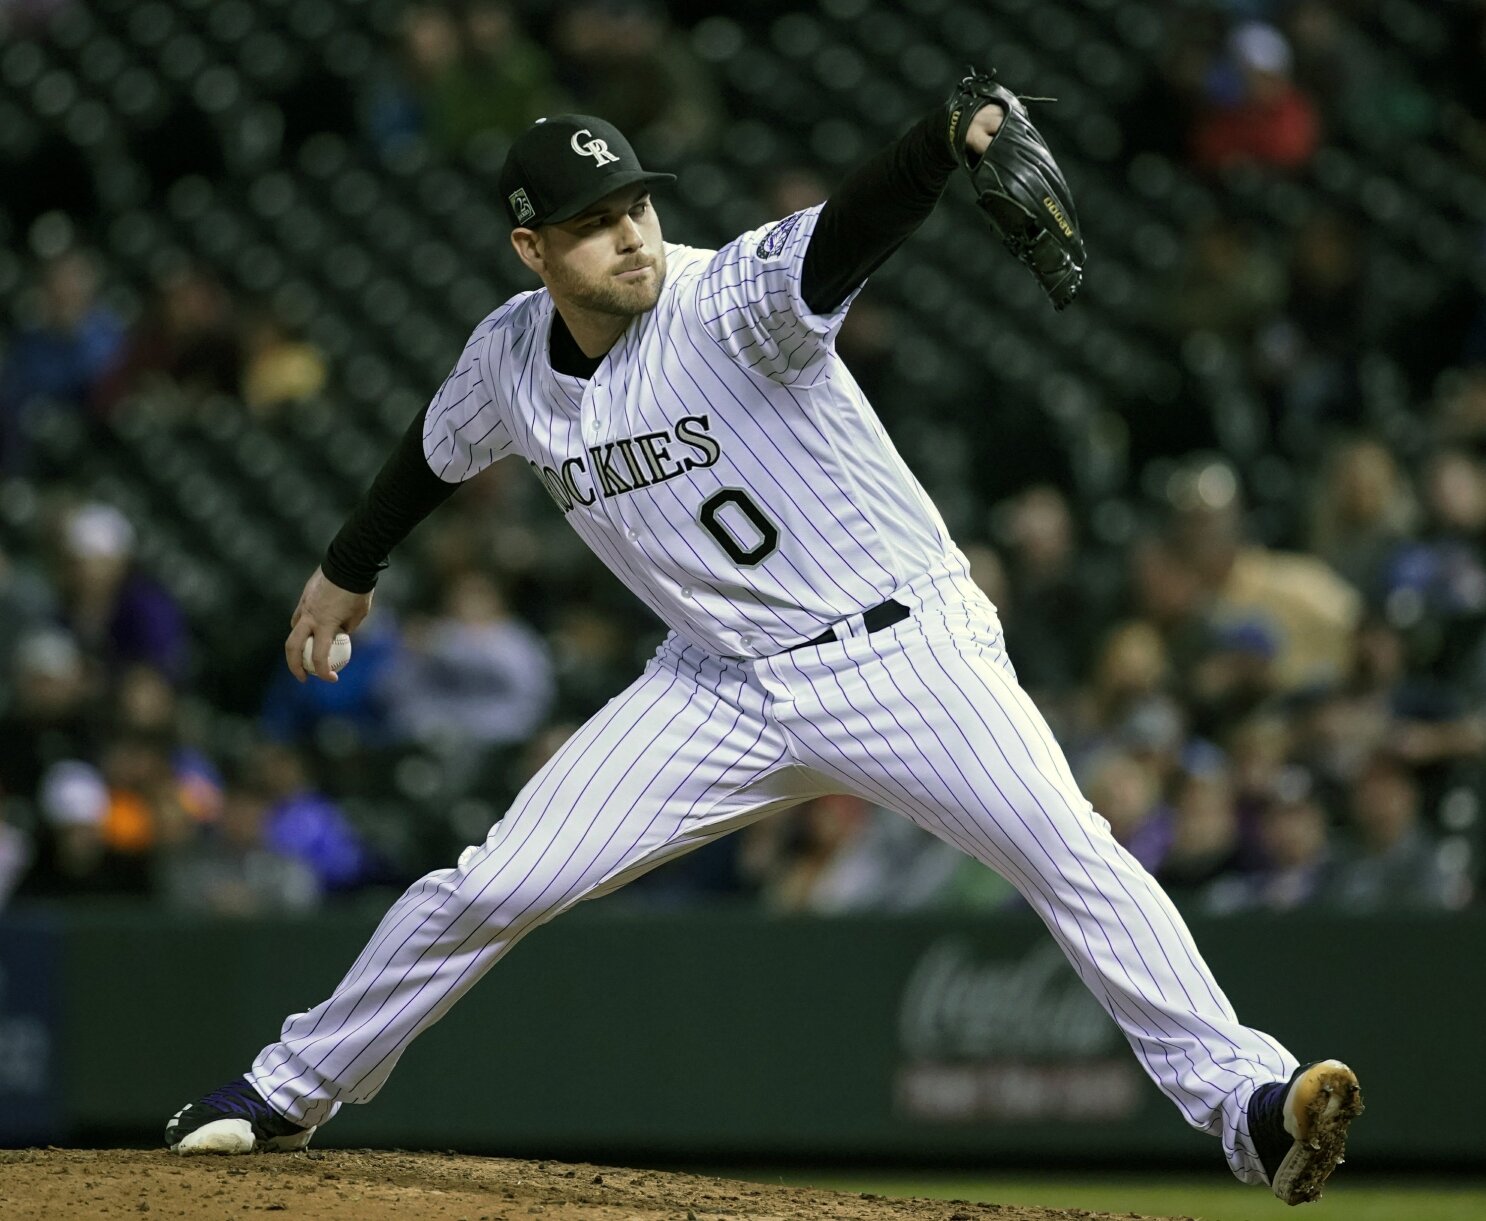 AP source: Ottavino, Yankees agree to $27M, 3-year contract